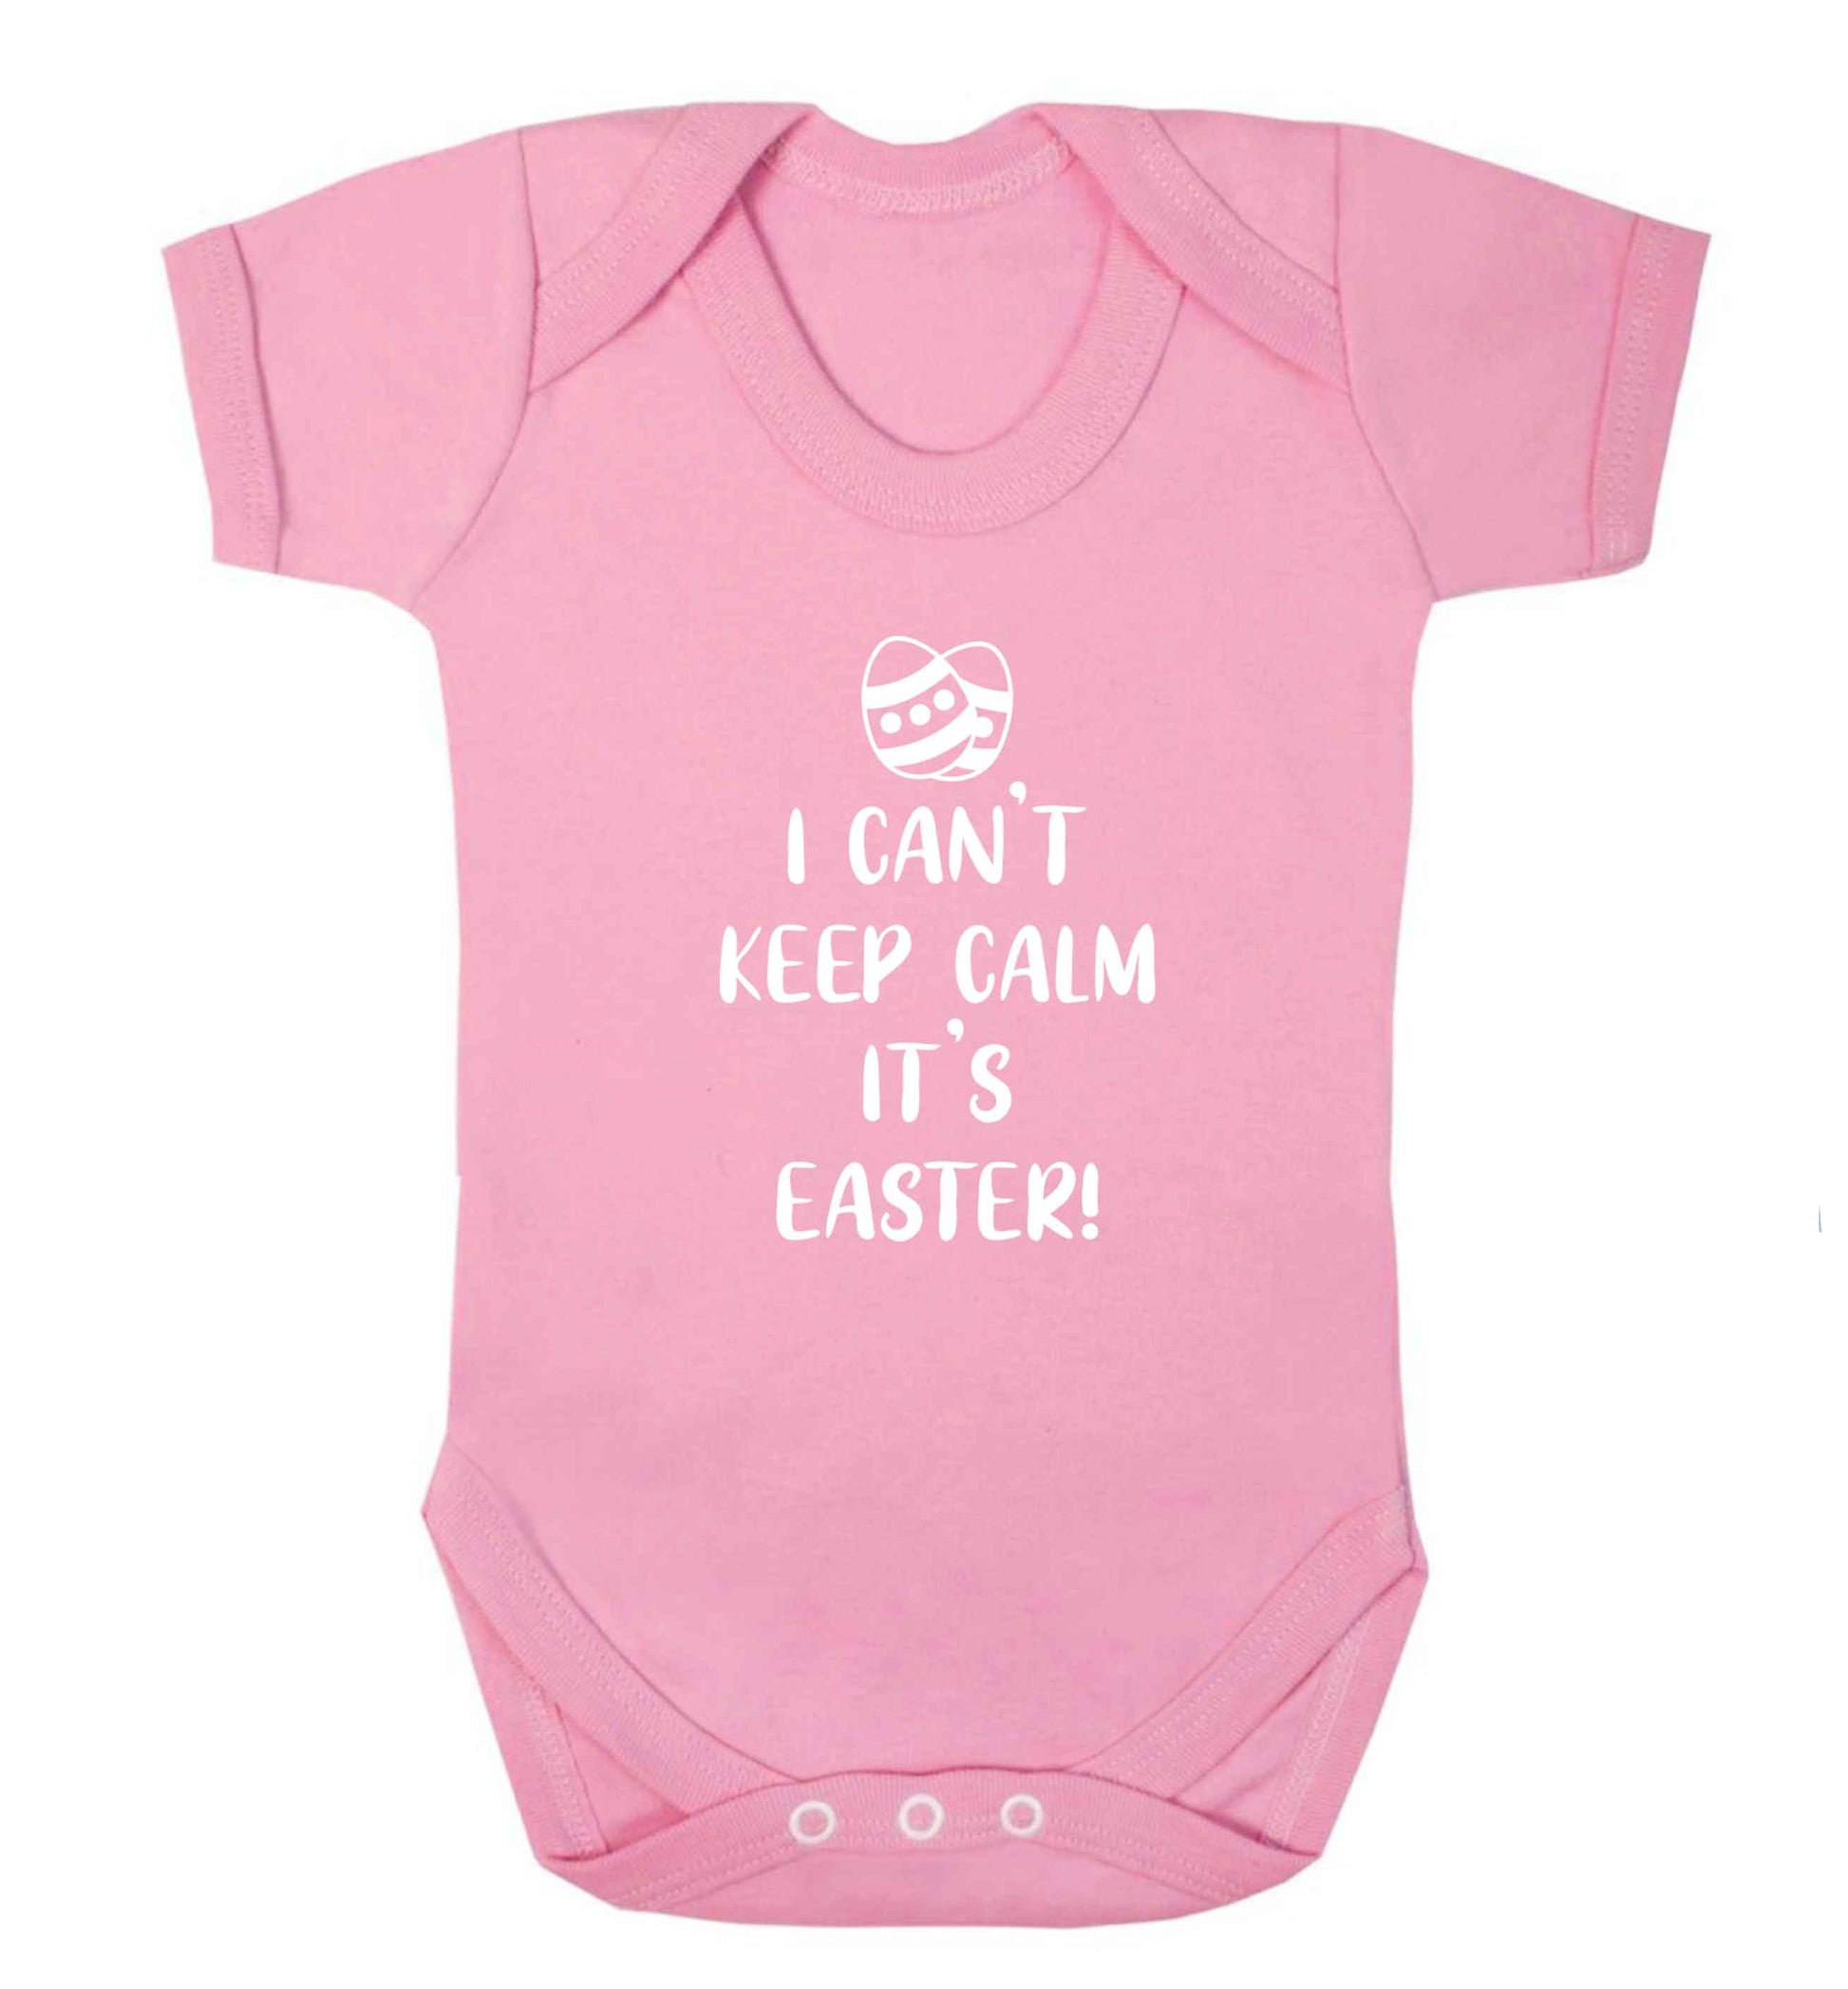 I can't keep calm it's Easter baby vest pale pink 18-24 months